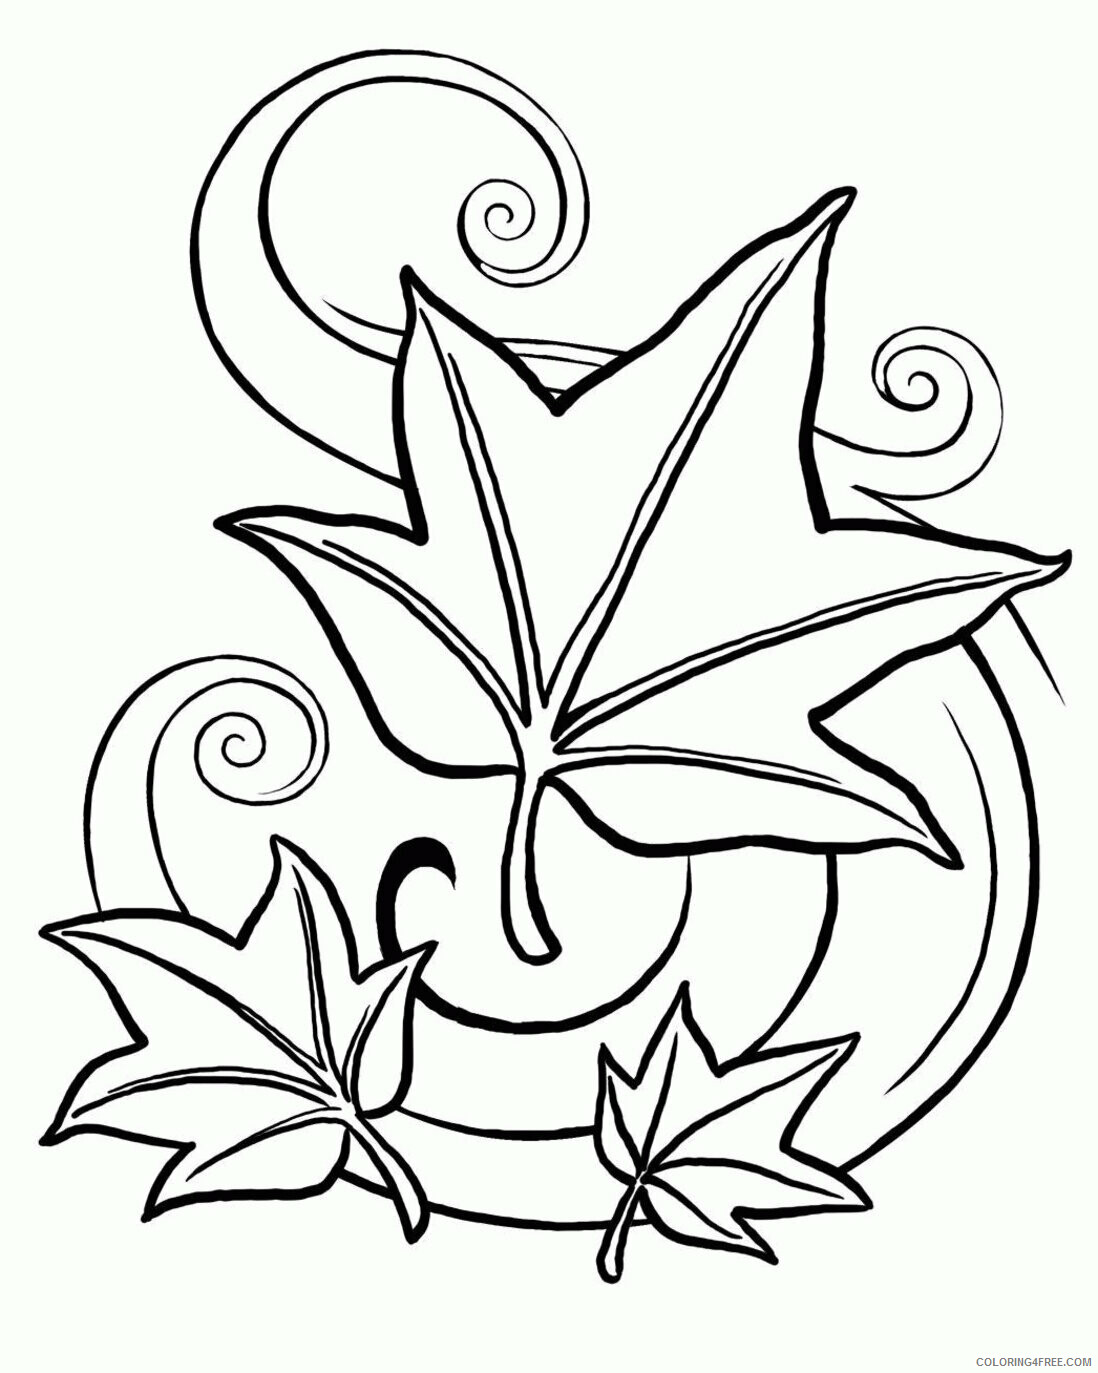 Autumn Coloring Pages for Preschoolers Printable Sheets Fall Themed Pictures High 2021 a Coloring4free